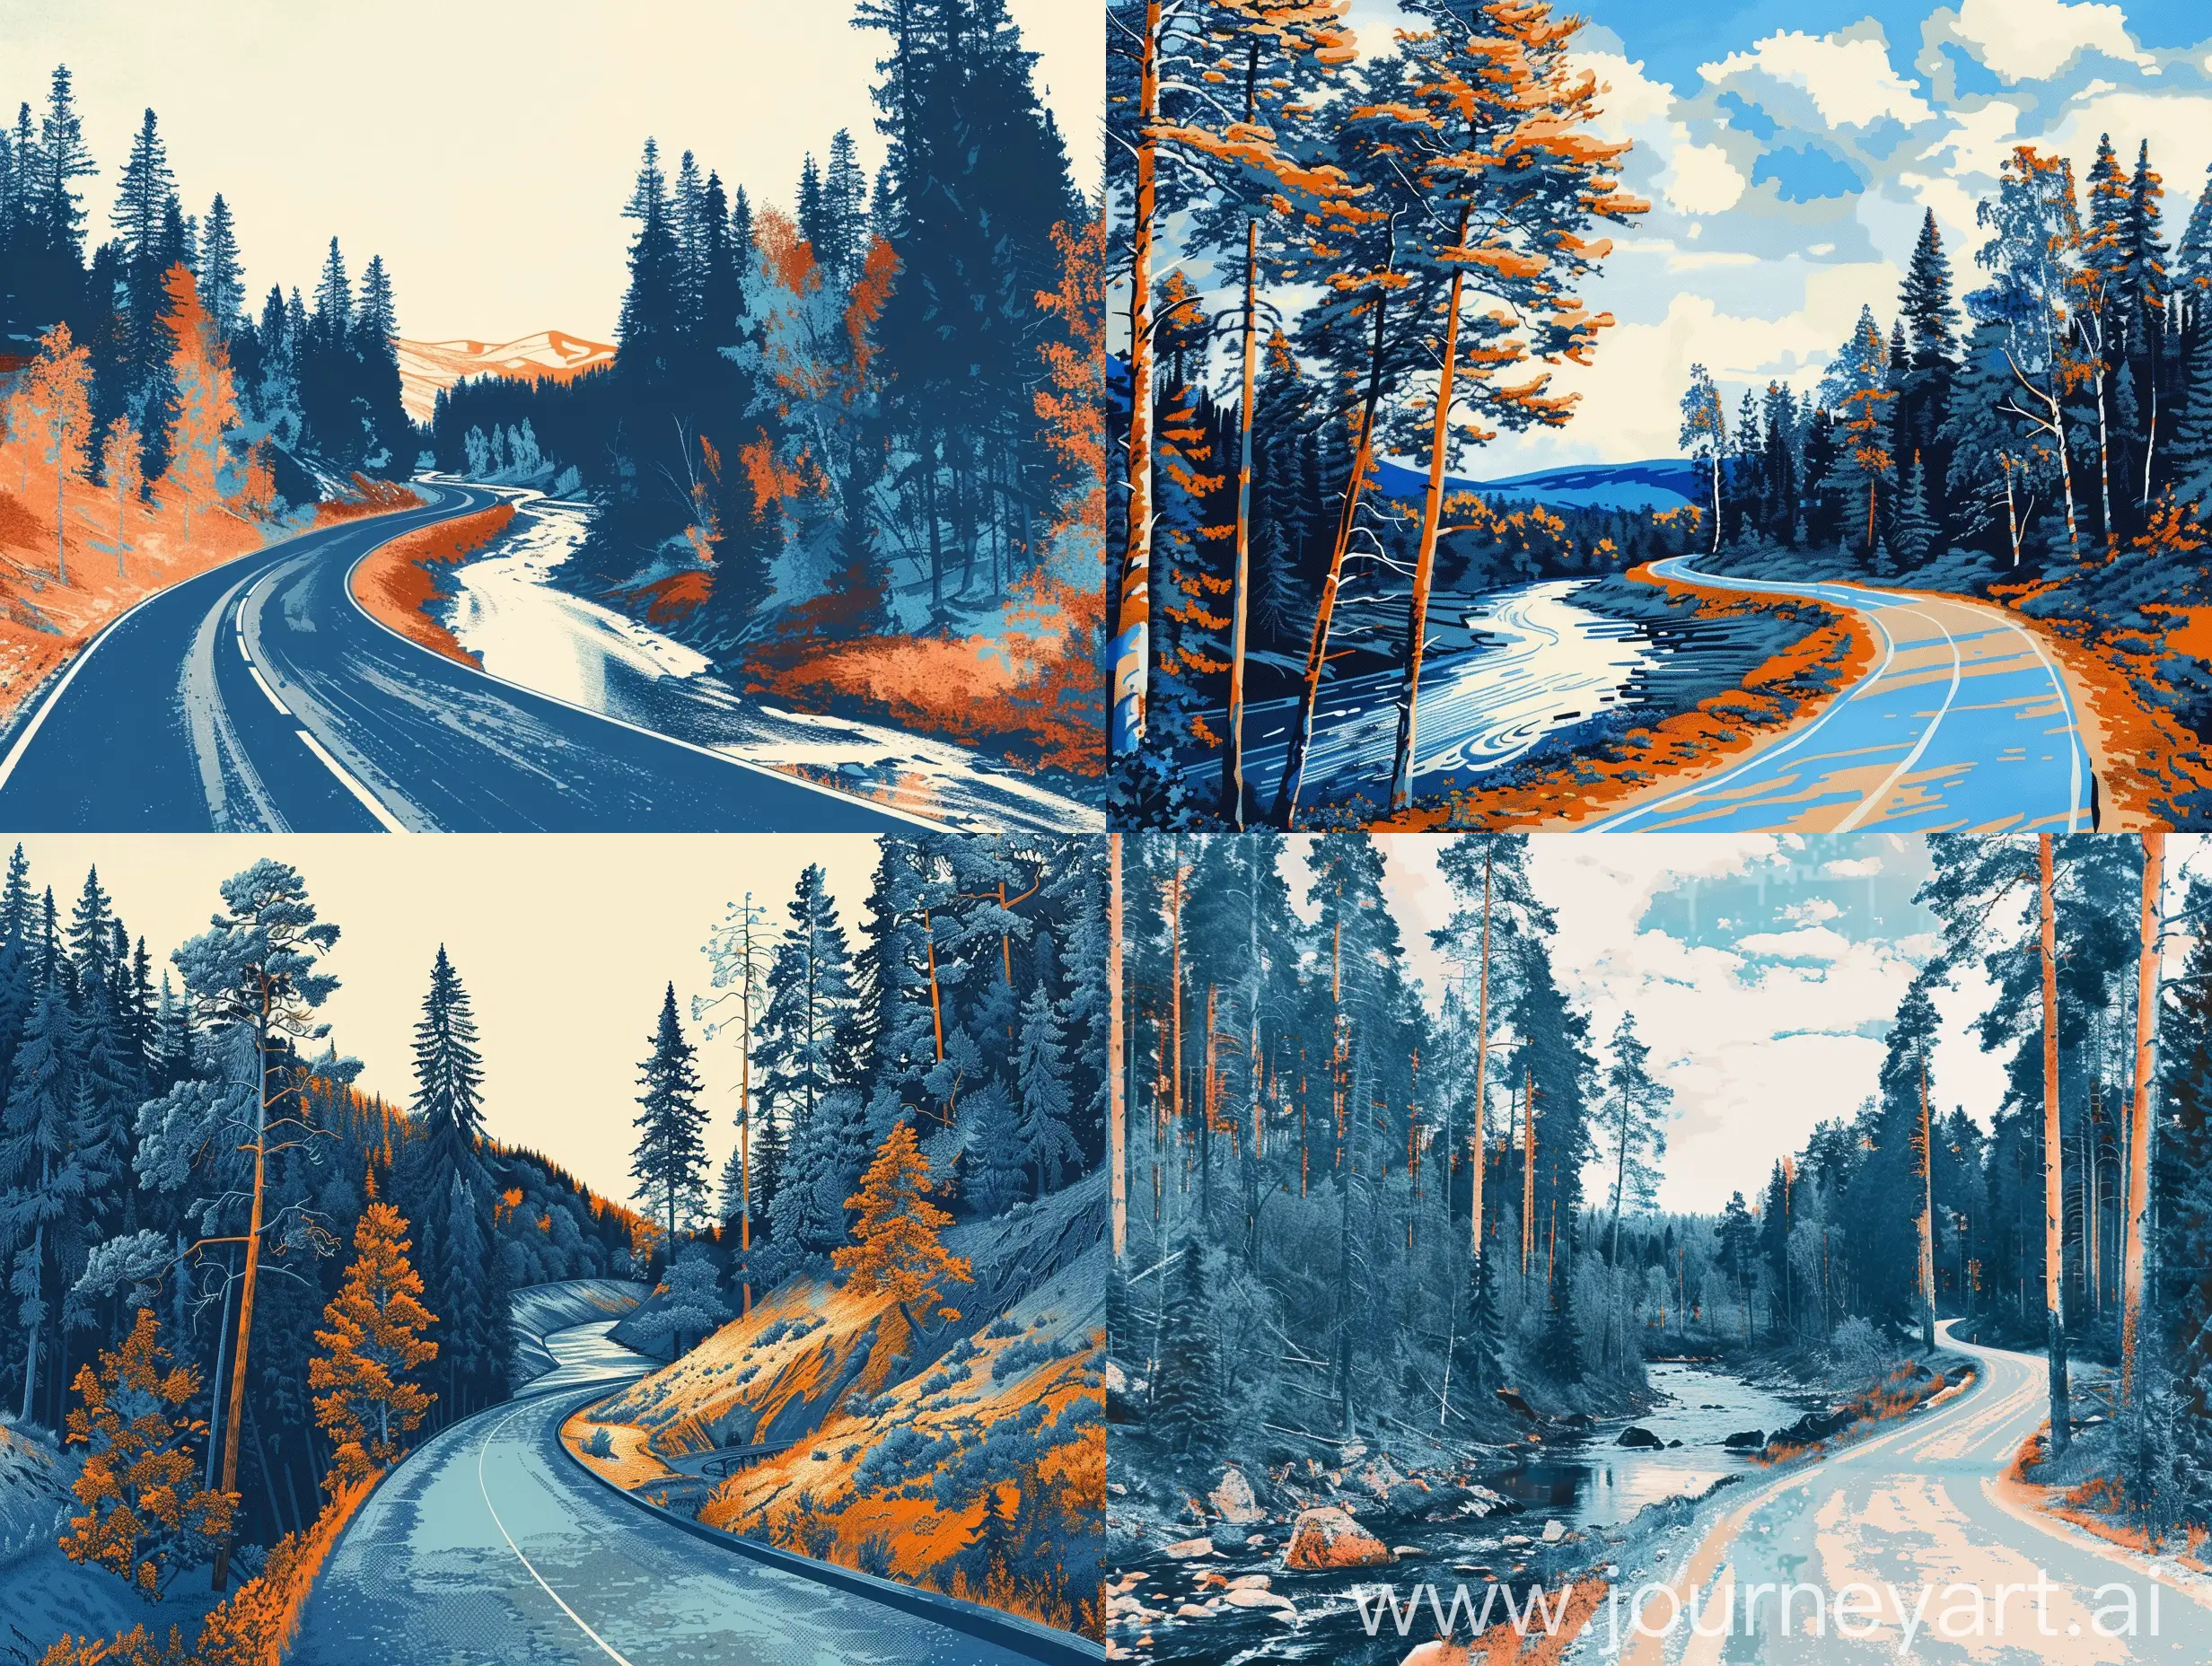 80s image of a road in a Siberian forest in summer, a river flows nearby. the image is very calm and beautiful. graphics. uses blue, orange, and white colors.